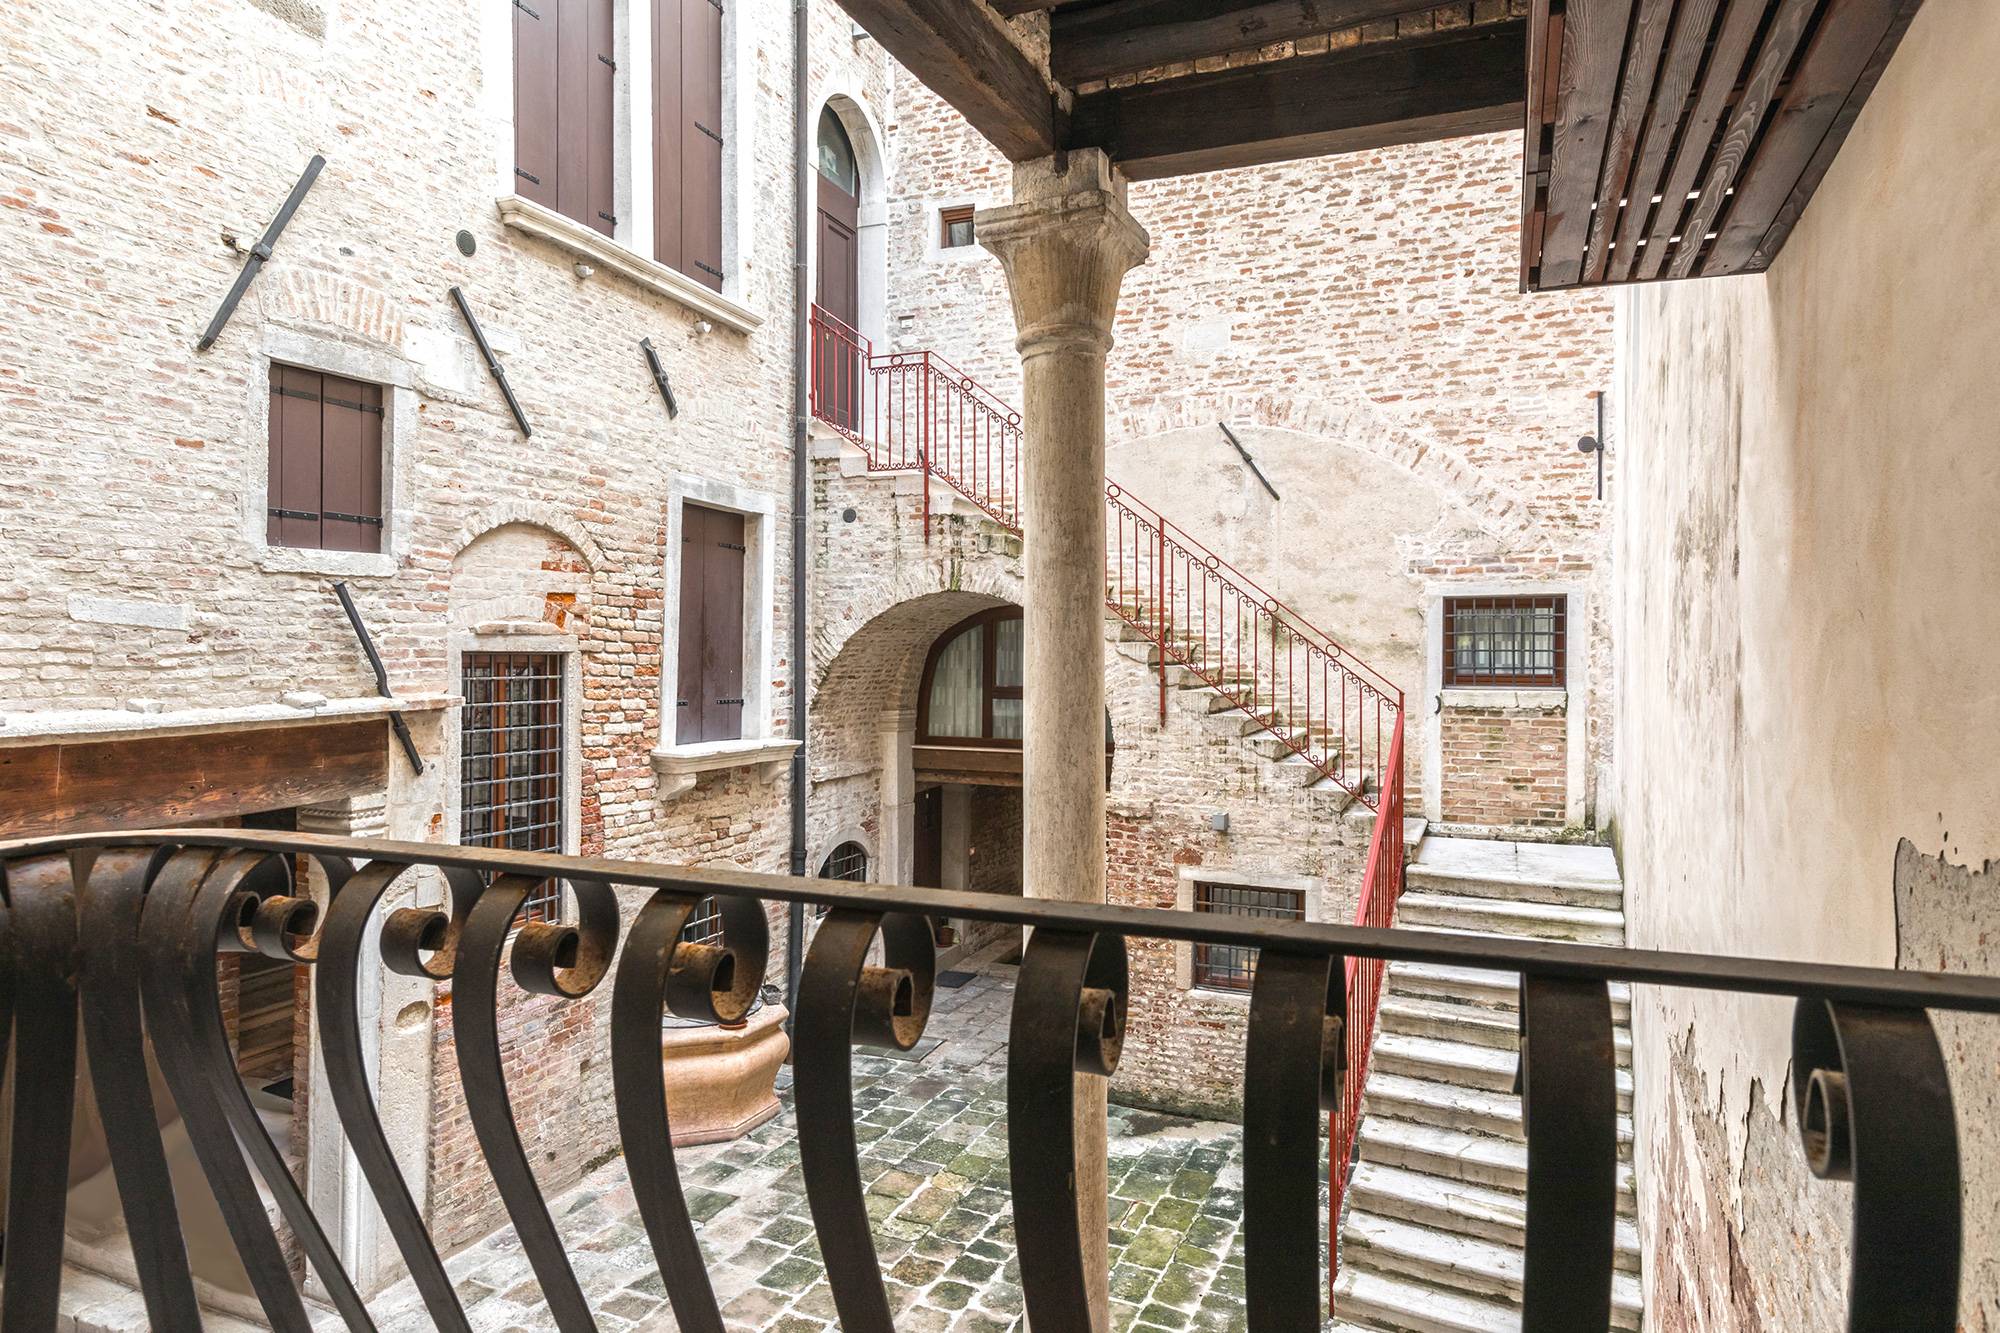 there is a small "Romeo & Juliet" kind of balcony facing the charming courtyard of this historical Palazzo